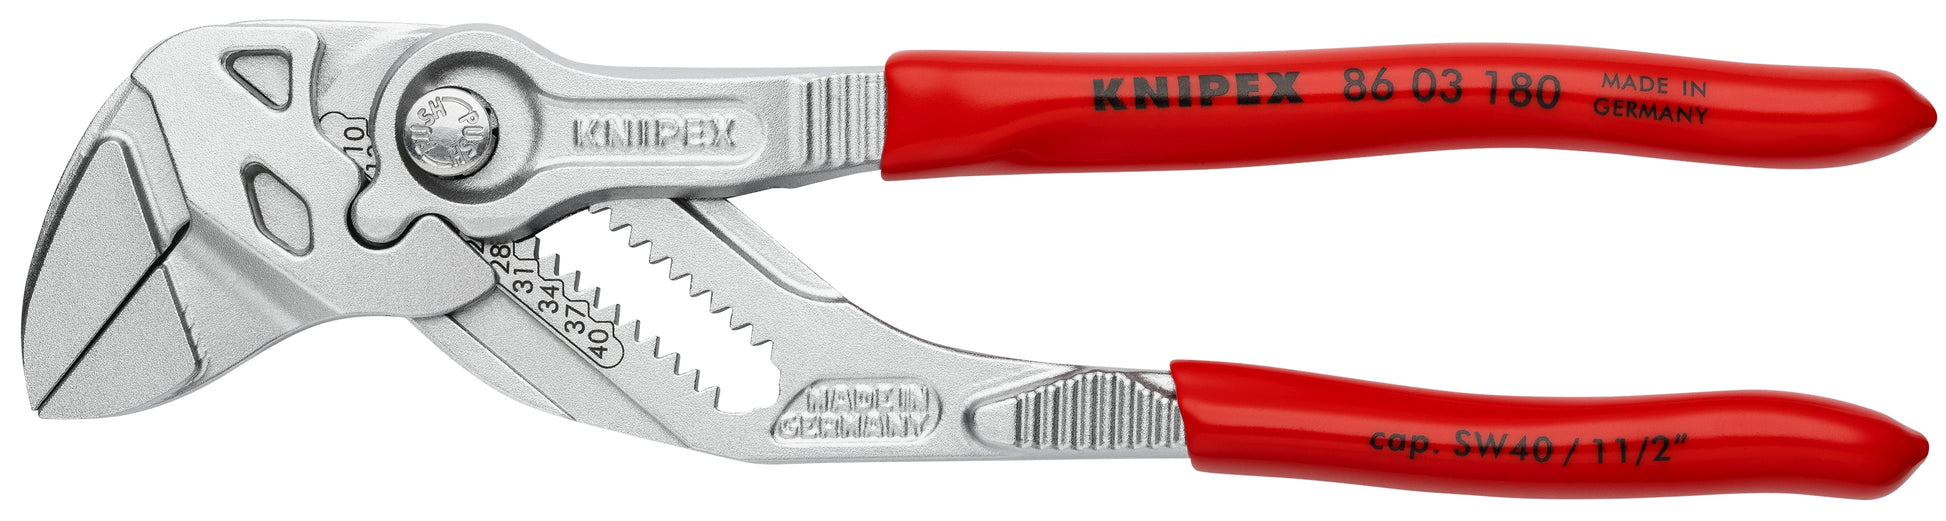 Knipex 00 20 06 US3 Black Pliers Wrench Set, 3 Pc.